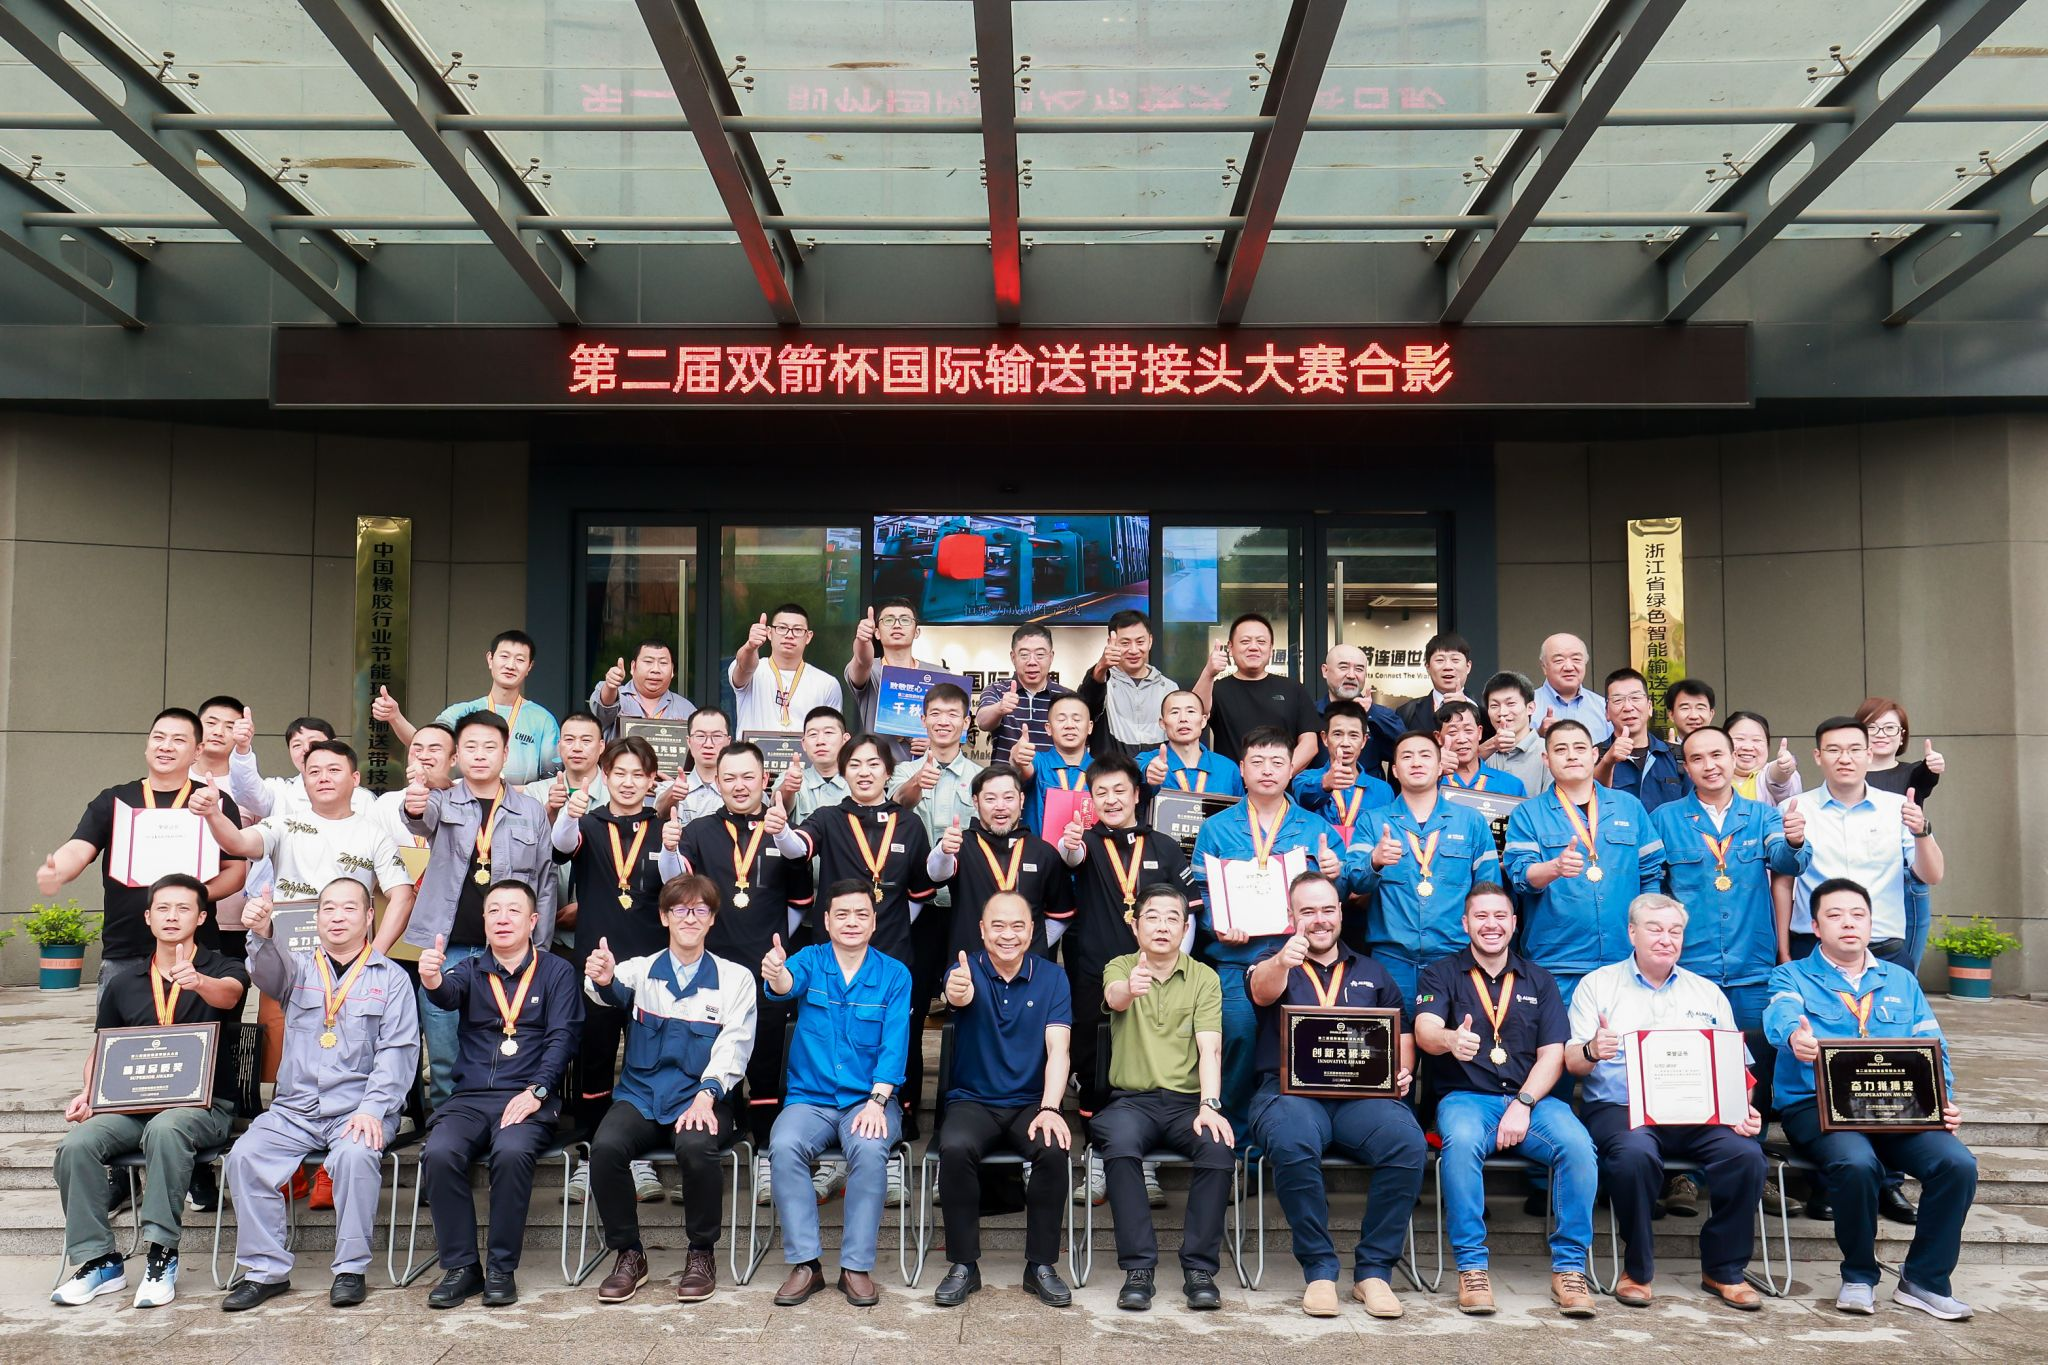 Celebrating the Conclusion of DOUBLE ARROW CUP - THE SECOND INTERNATIONAL CONVEYOR BELT SPLICING COMPETITION!